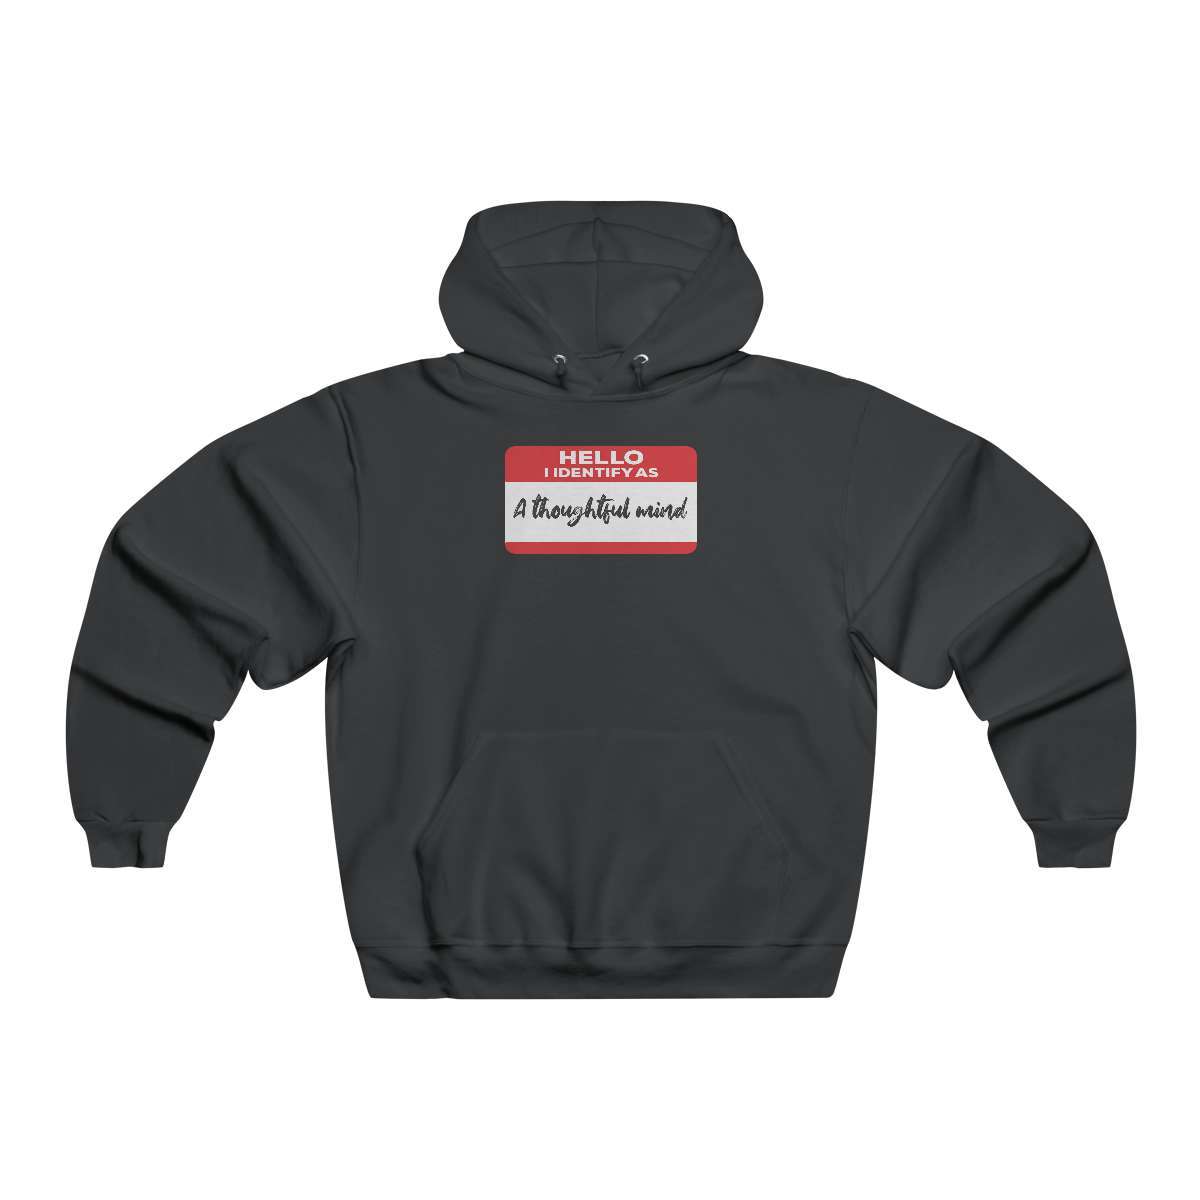 A Thoughtful Mind Hoodie